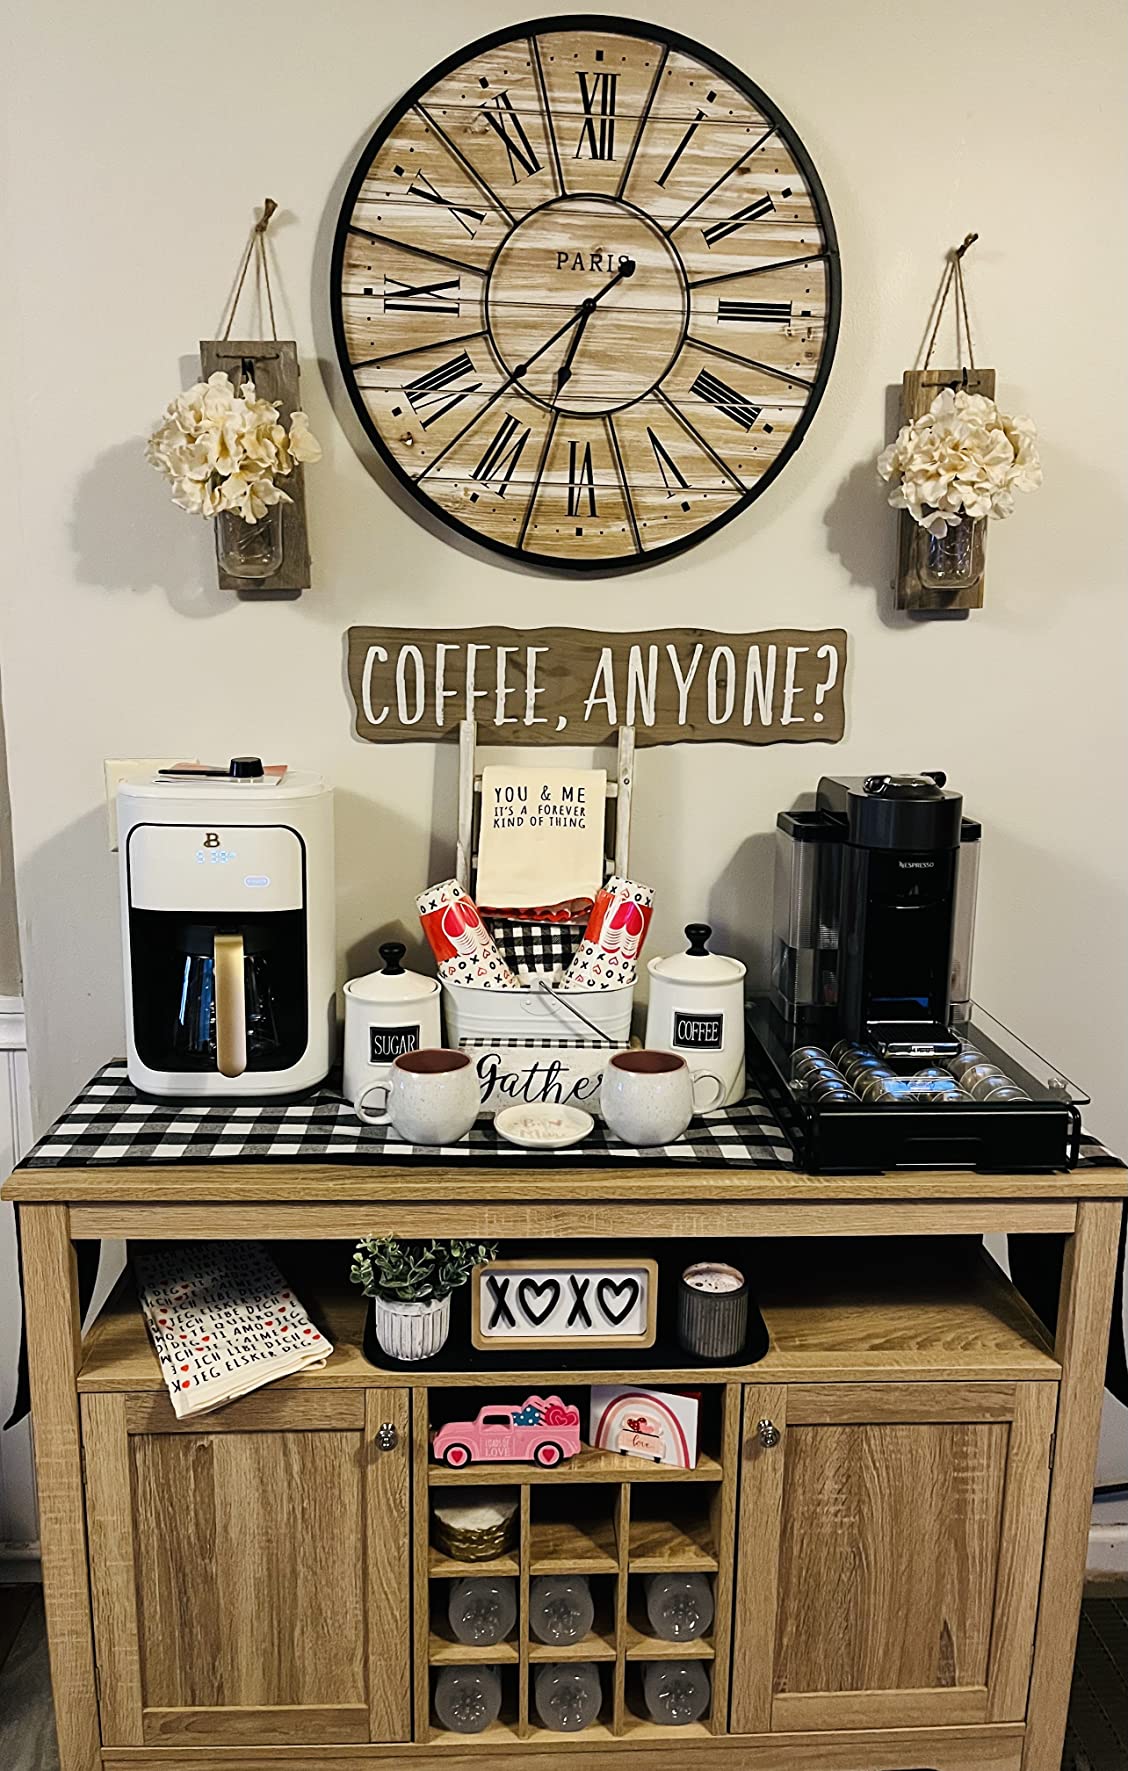 Perfect for my coffee station